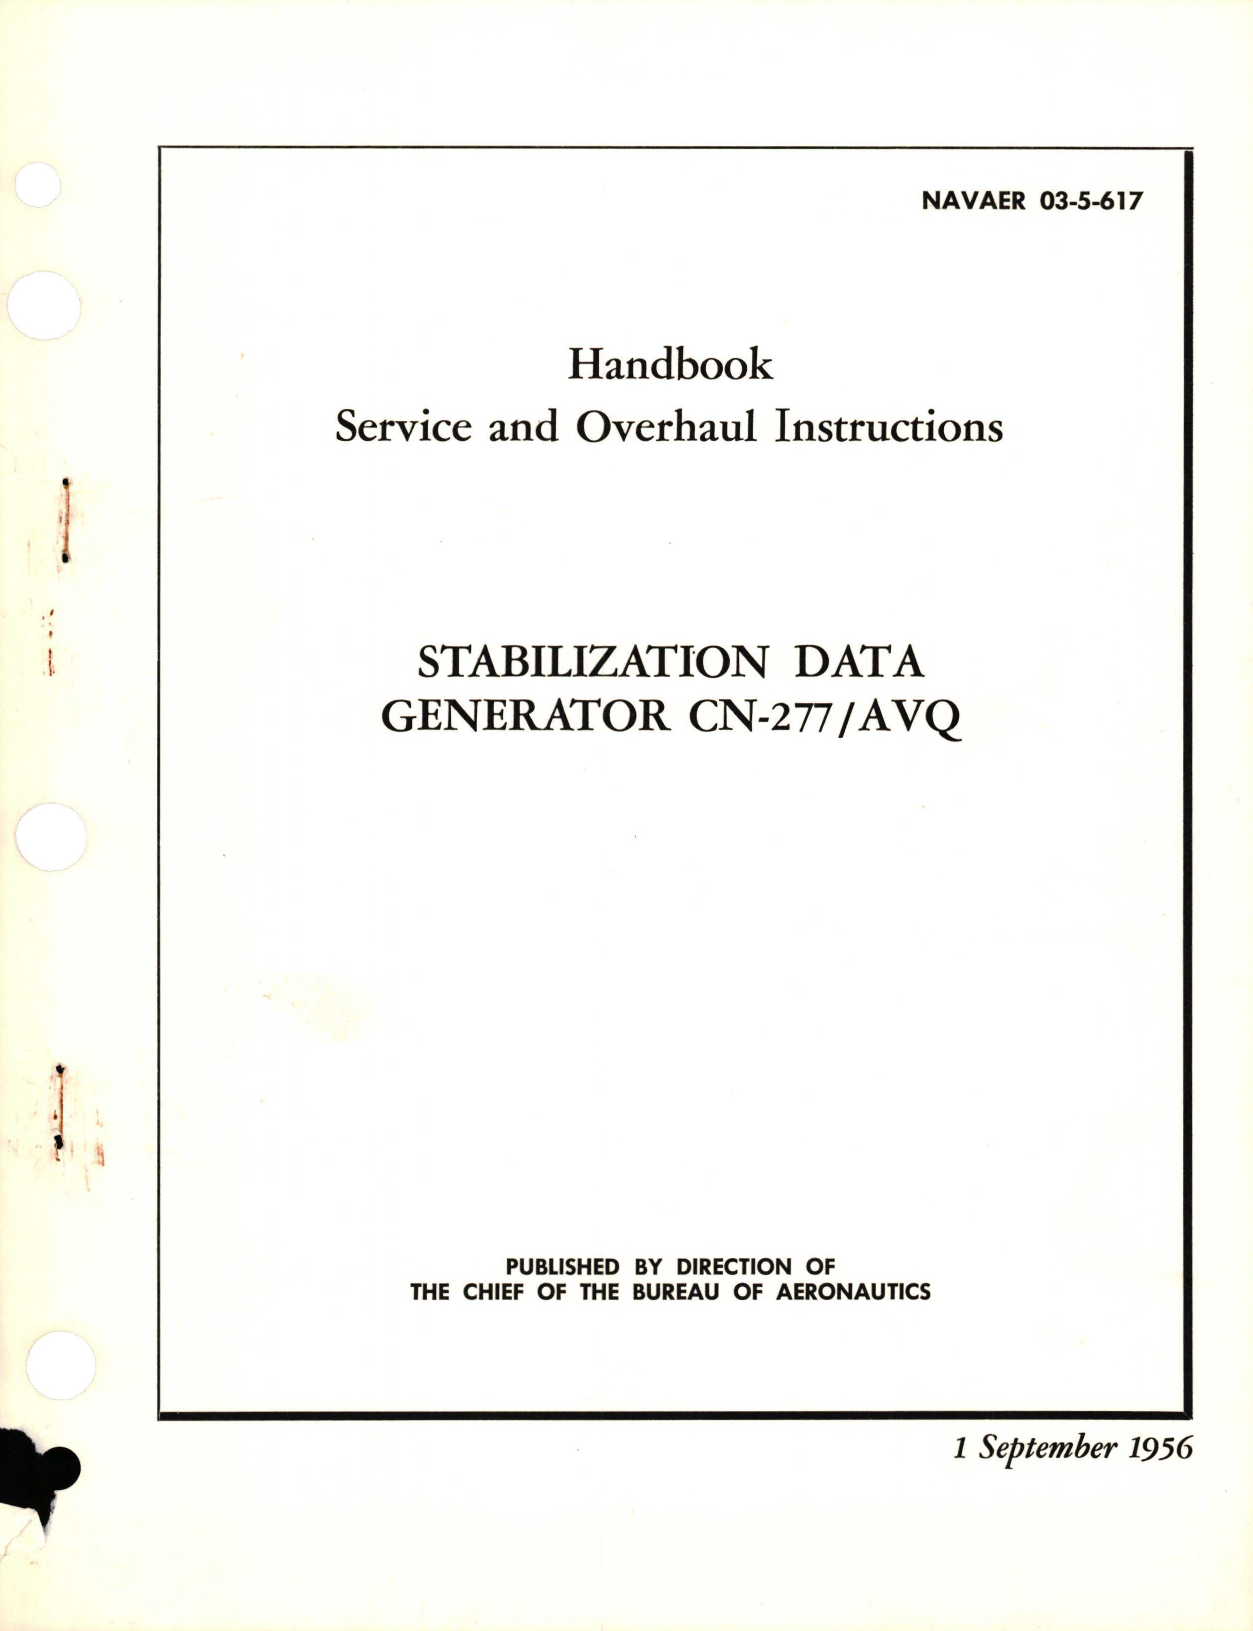 Sample page 1 from AirCorps Library document: Service and Overhaul Instructions for Stabilization Data Generator - CN-277-AVG